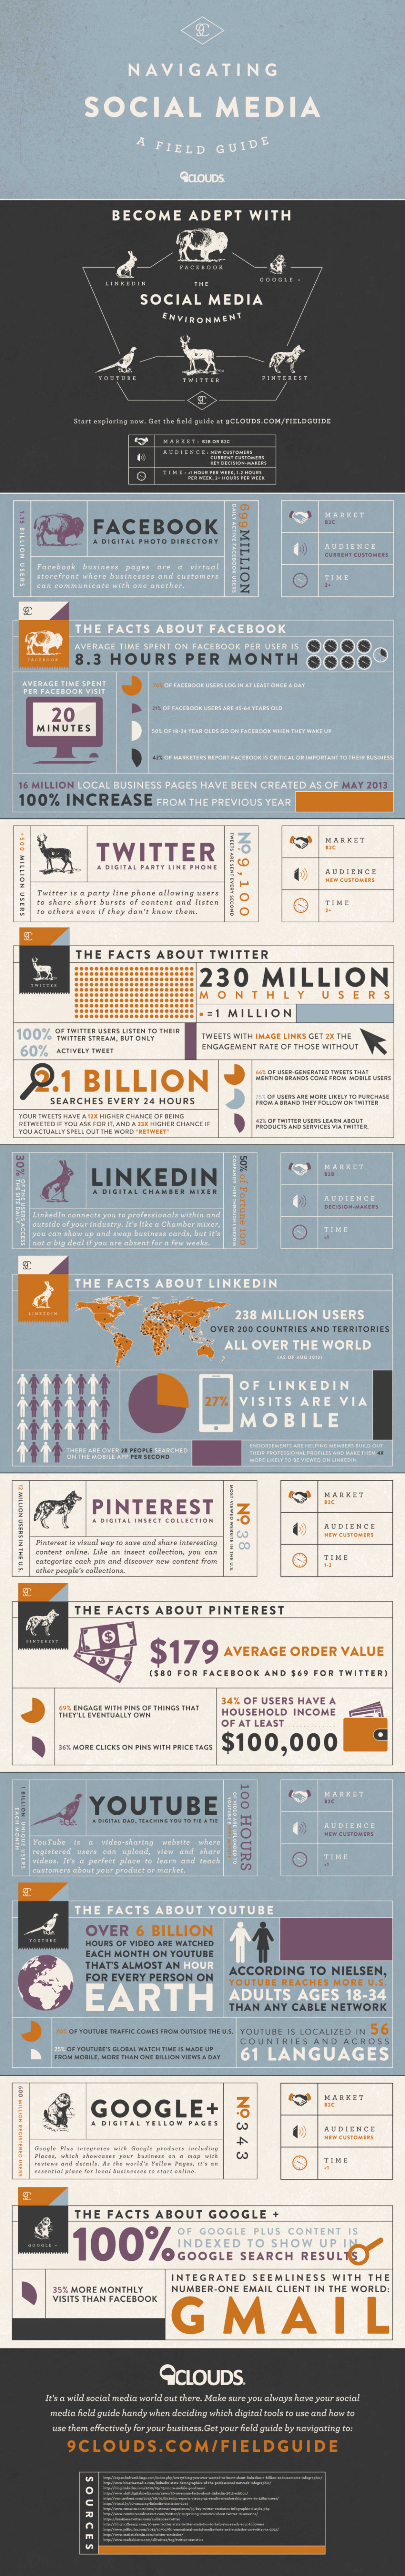 Social-Media-Field-Guide-Infographic_FINAL